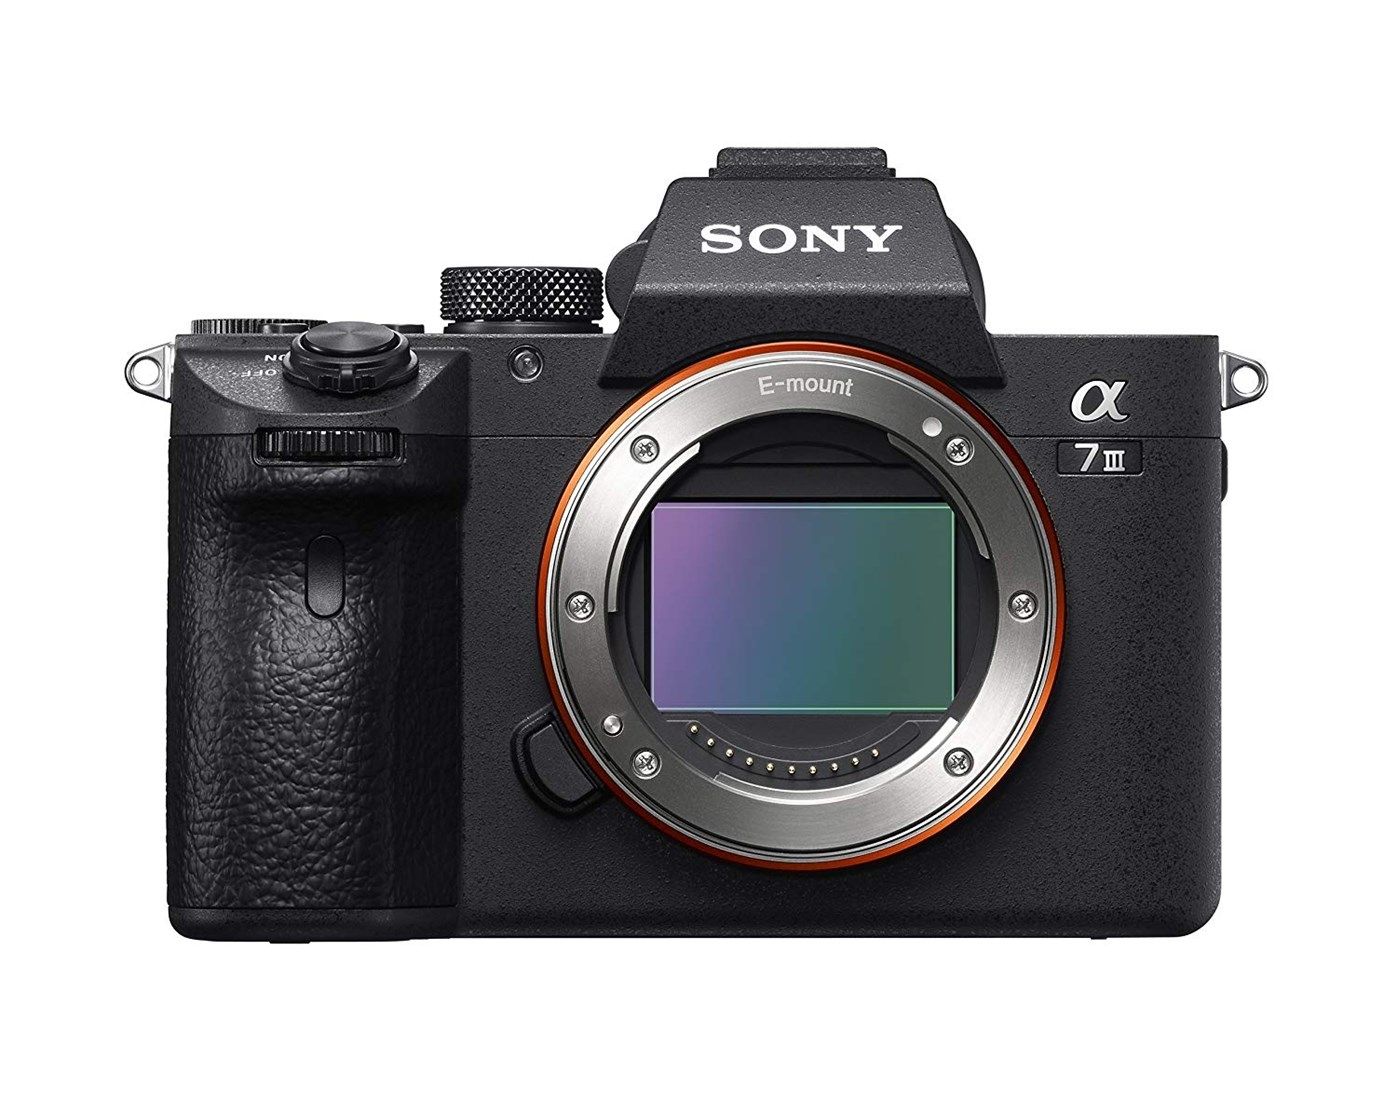 Sony Alpha a7 III Mirrorless Camera - Body only - Product Photo 2 - Alternative view of the front of the camera